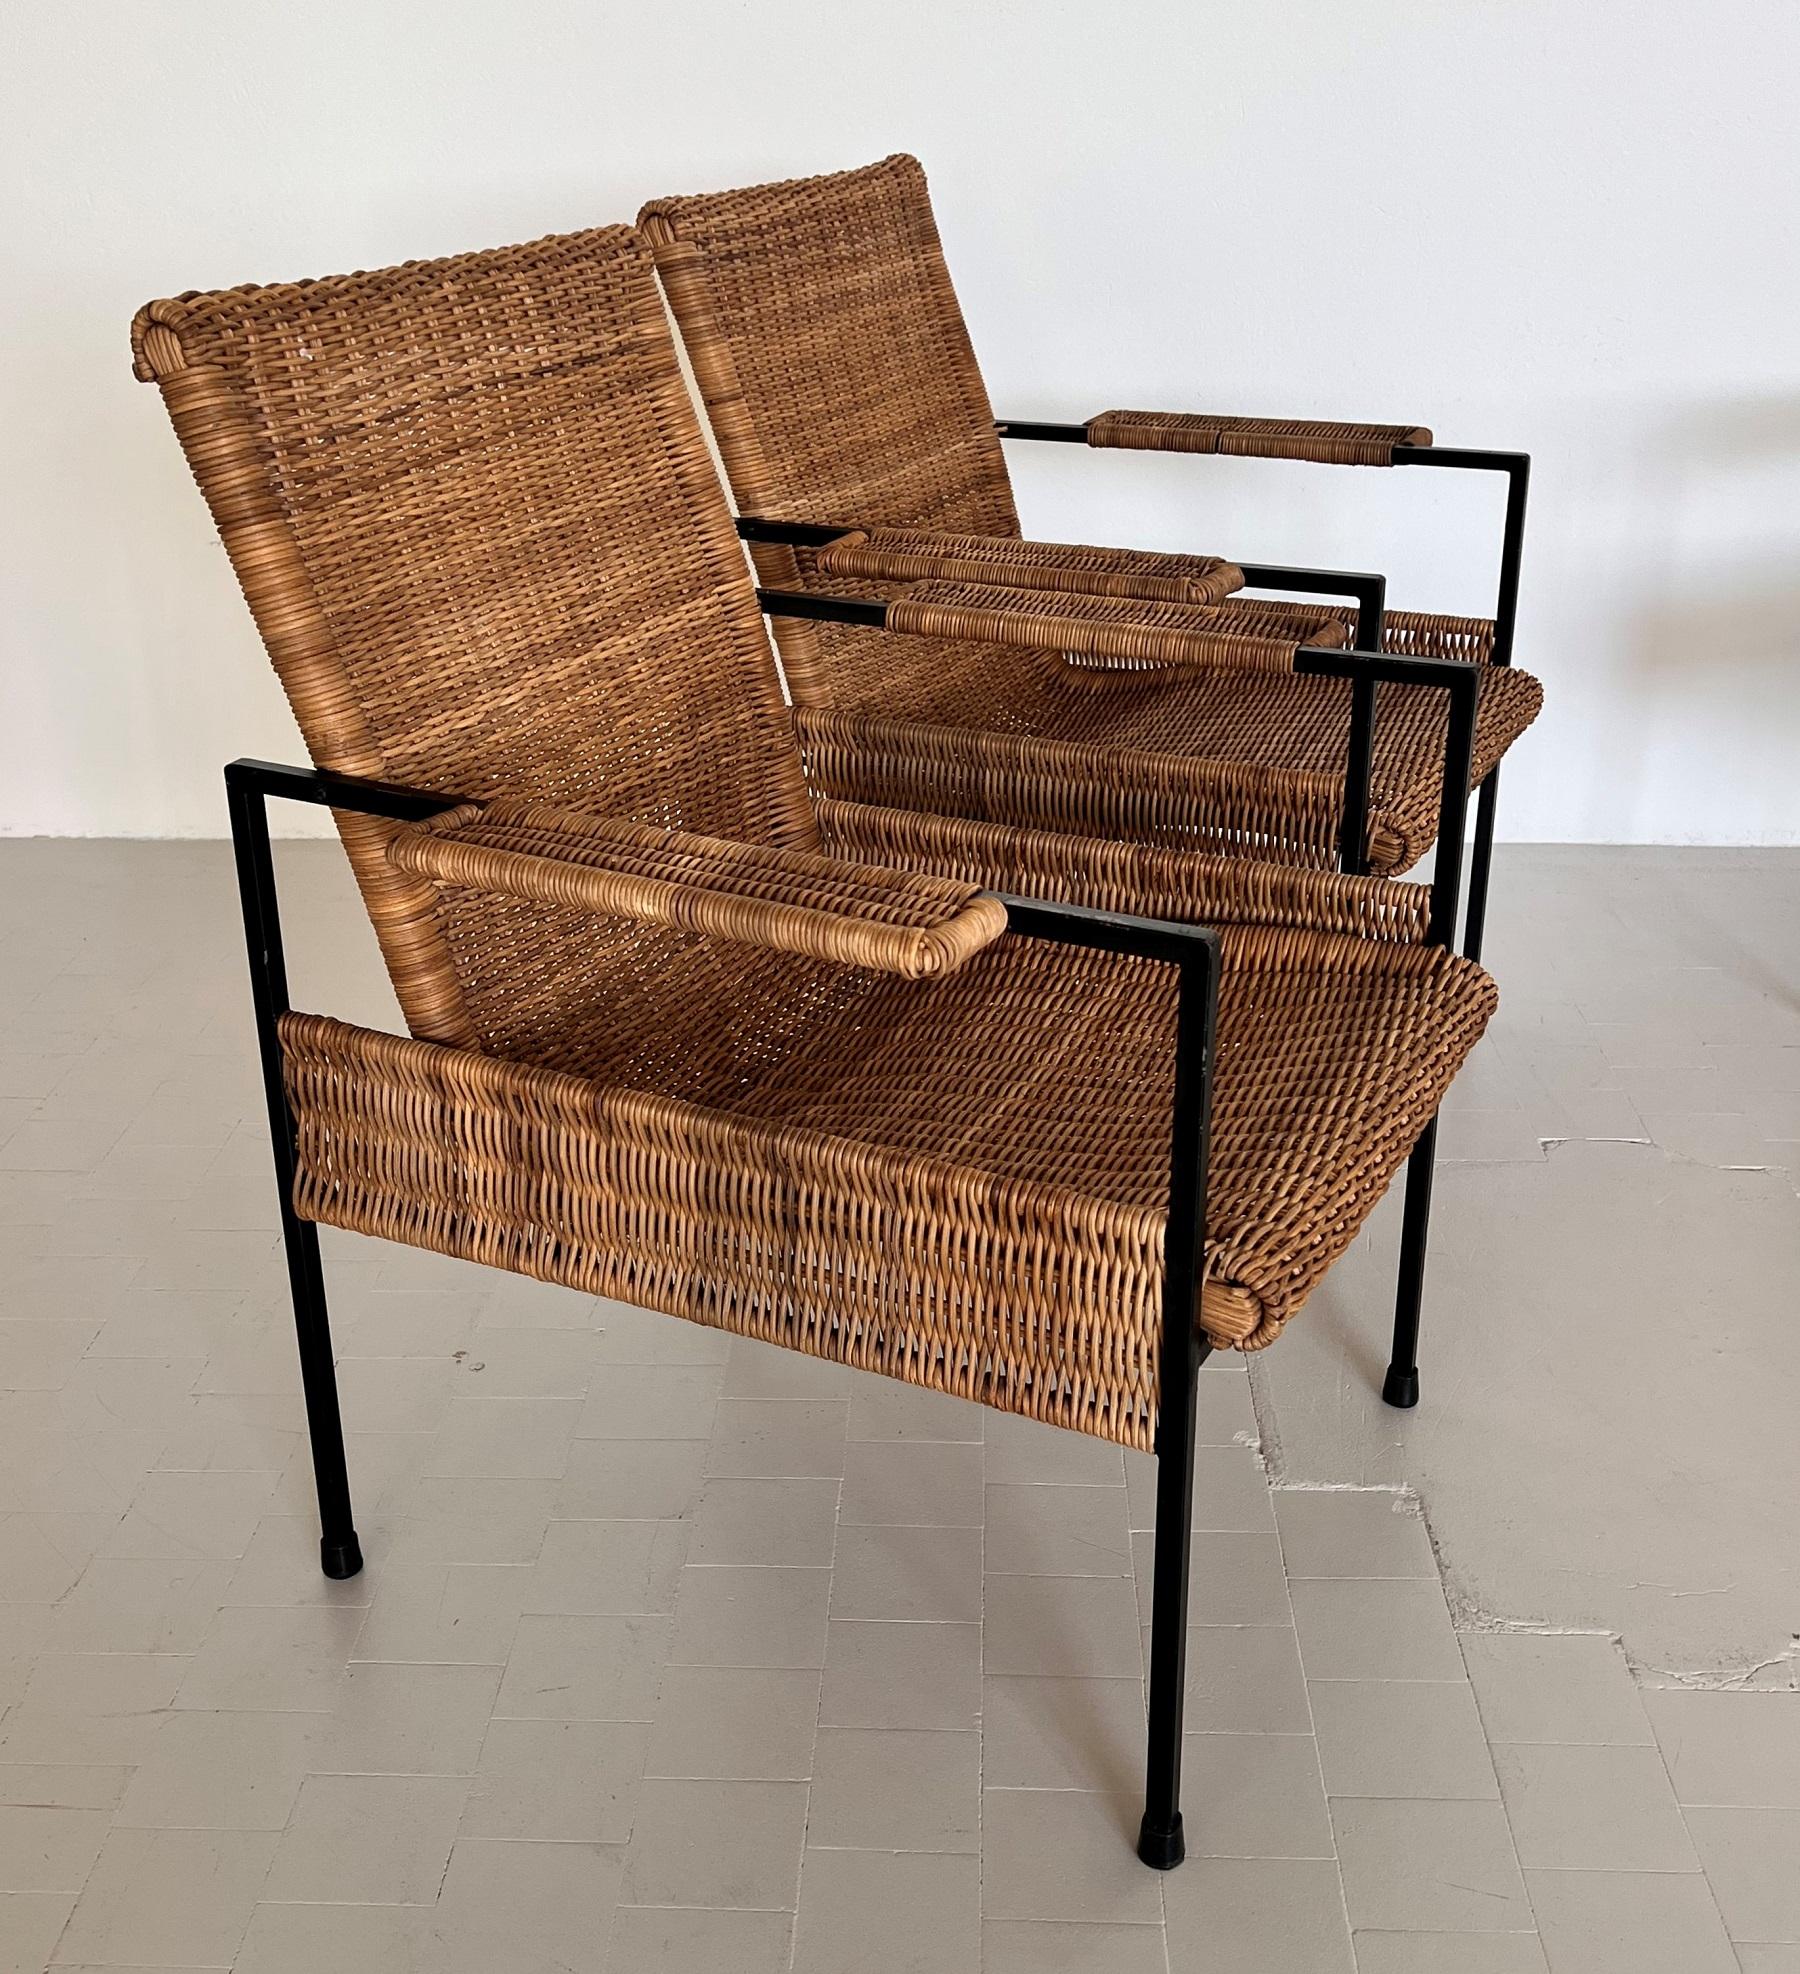 Italian Comfortable Midcentury Rattan Wicker and Iron Lounge Chairs, set of 4 For Sale 2